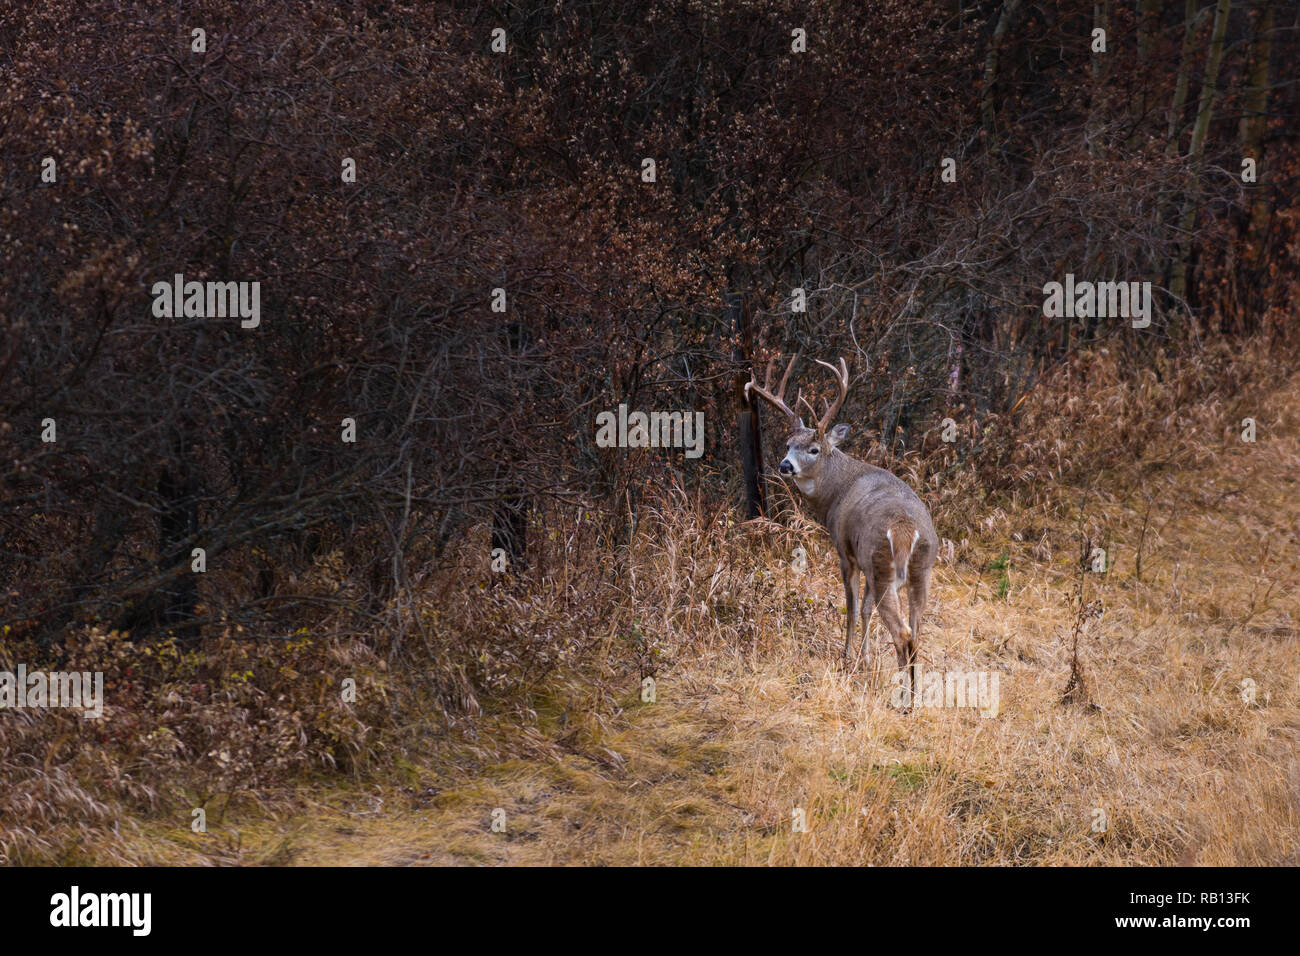 Wid deer in a autumn forest clearing Stock Photo